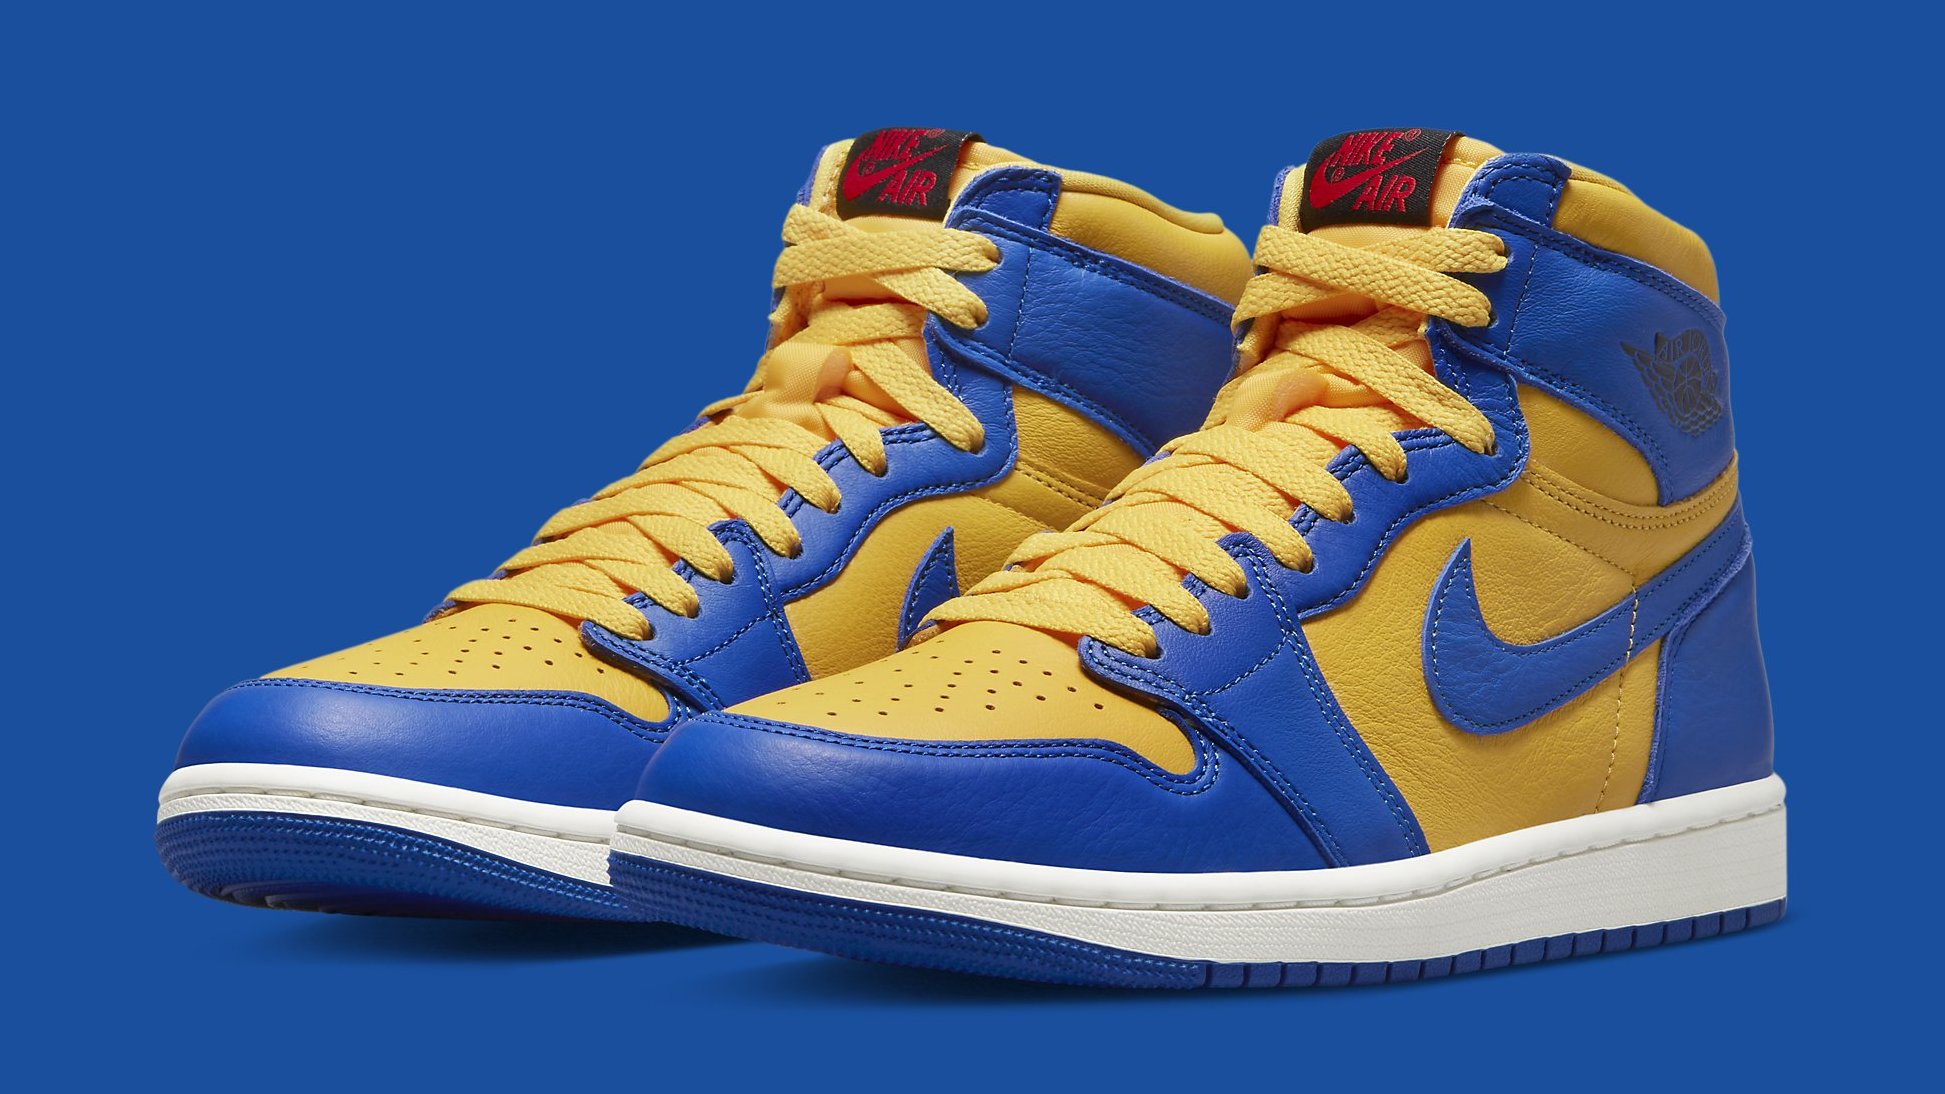 blue and yellow jordans